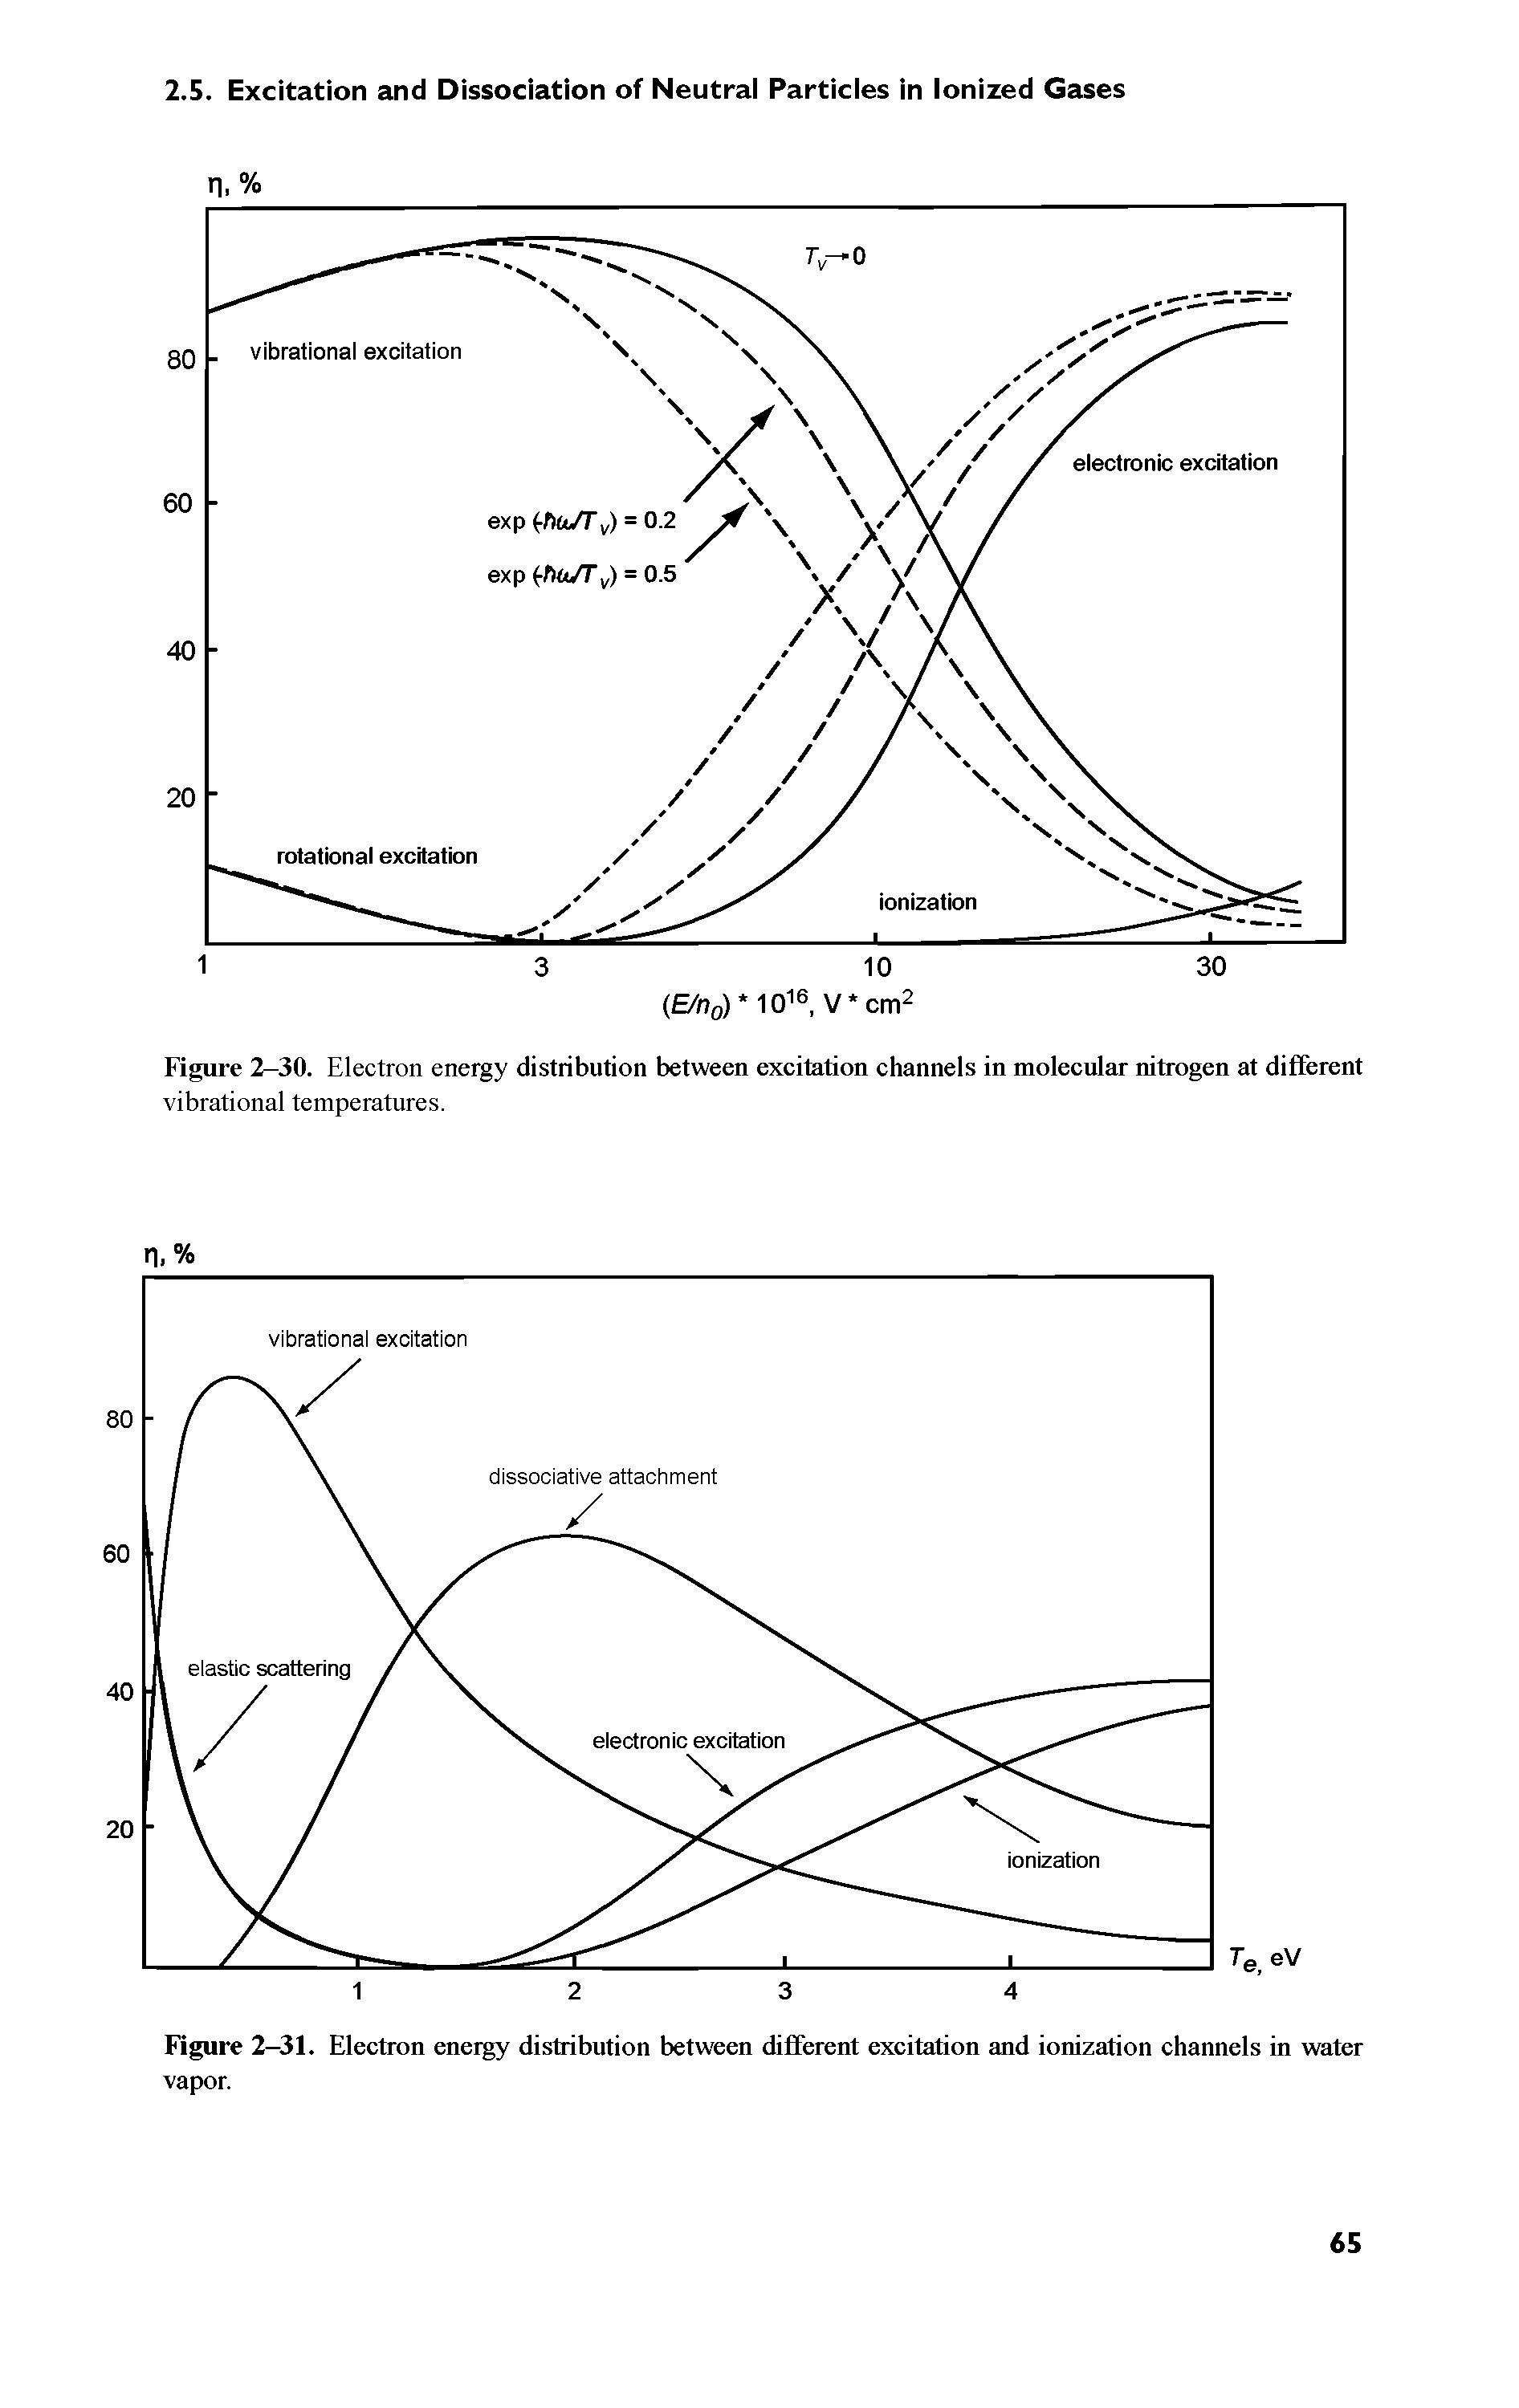 Figure 2-31. Electron energy distribution between different excitation and ionization channels in water vapor.